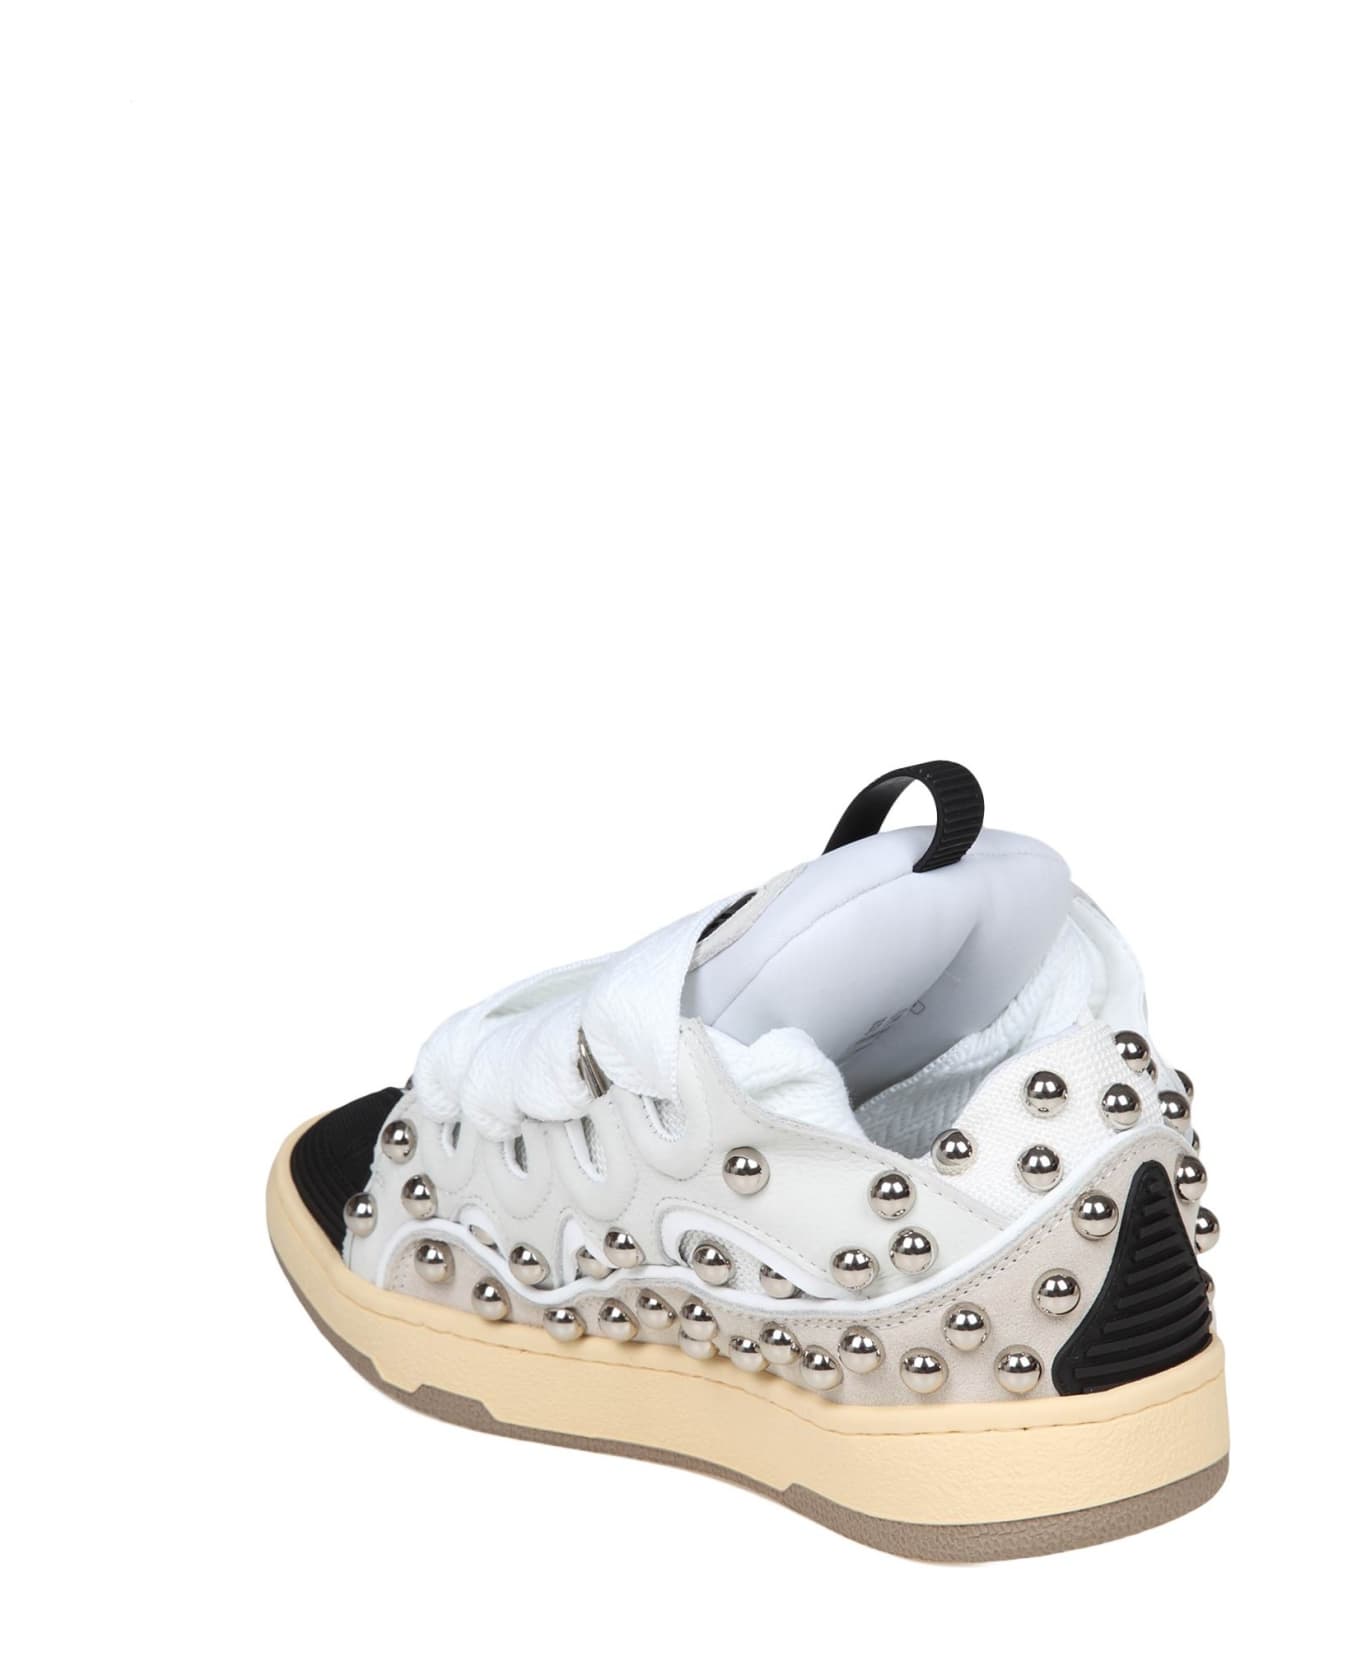 Lanvin Curb Sneakers In Black And White Leather With Applied Studs - White